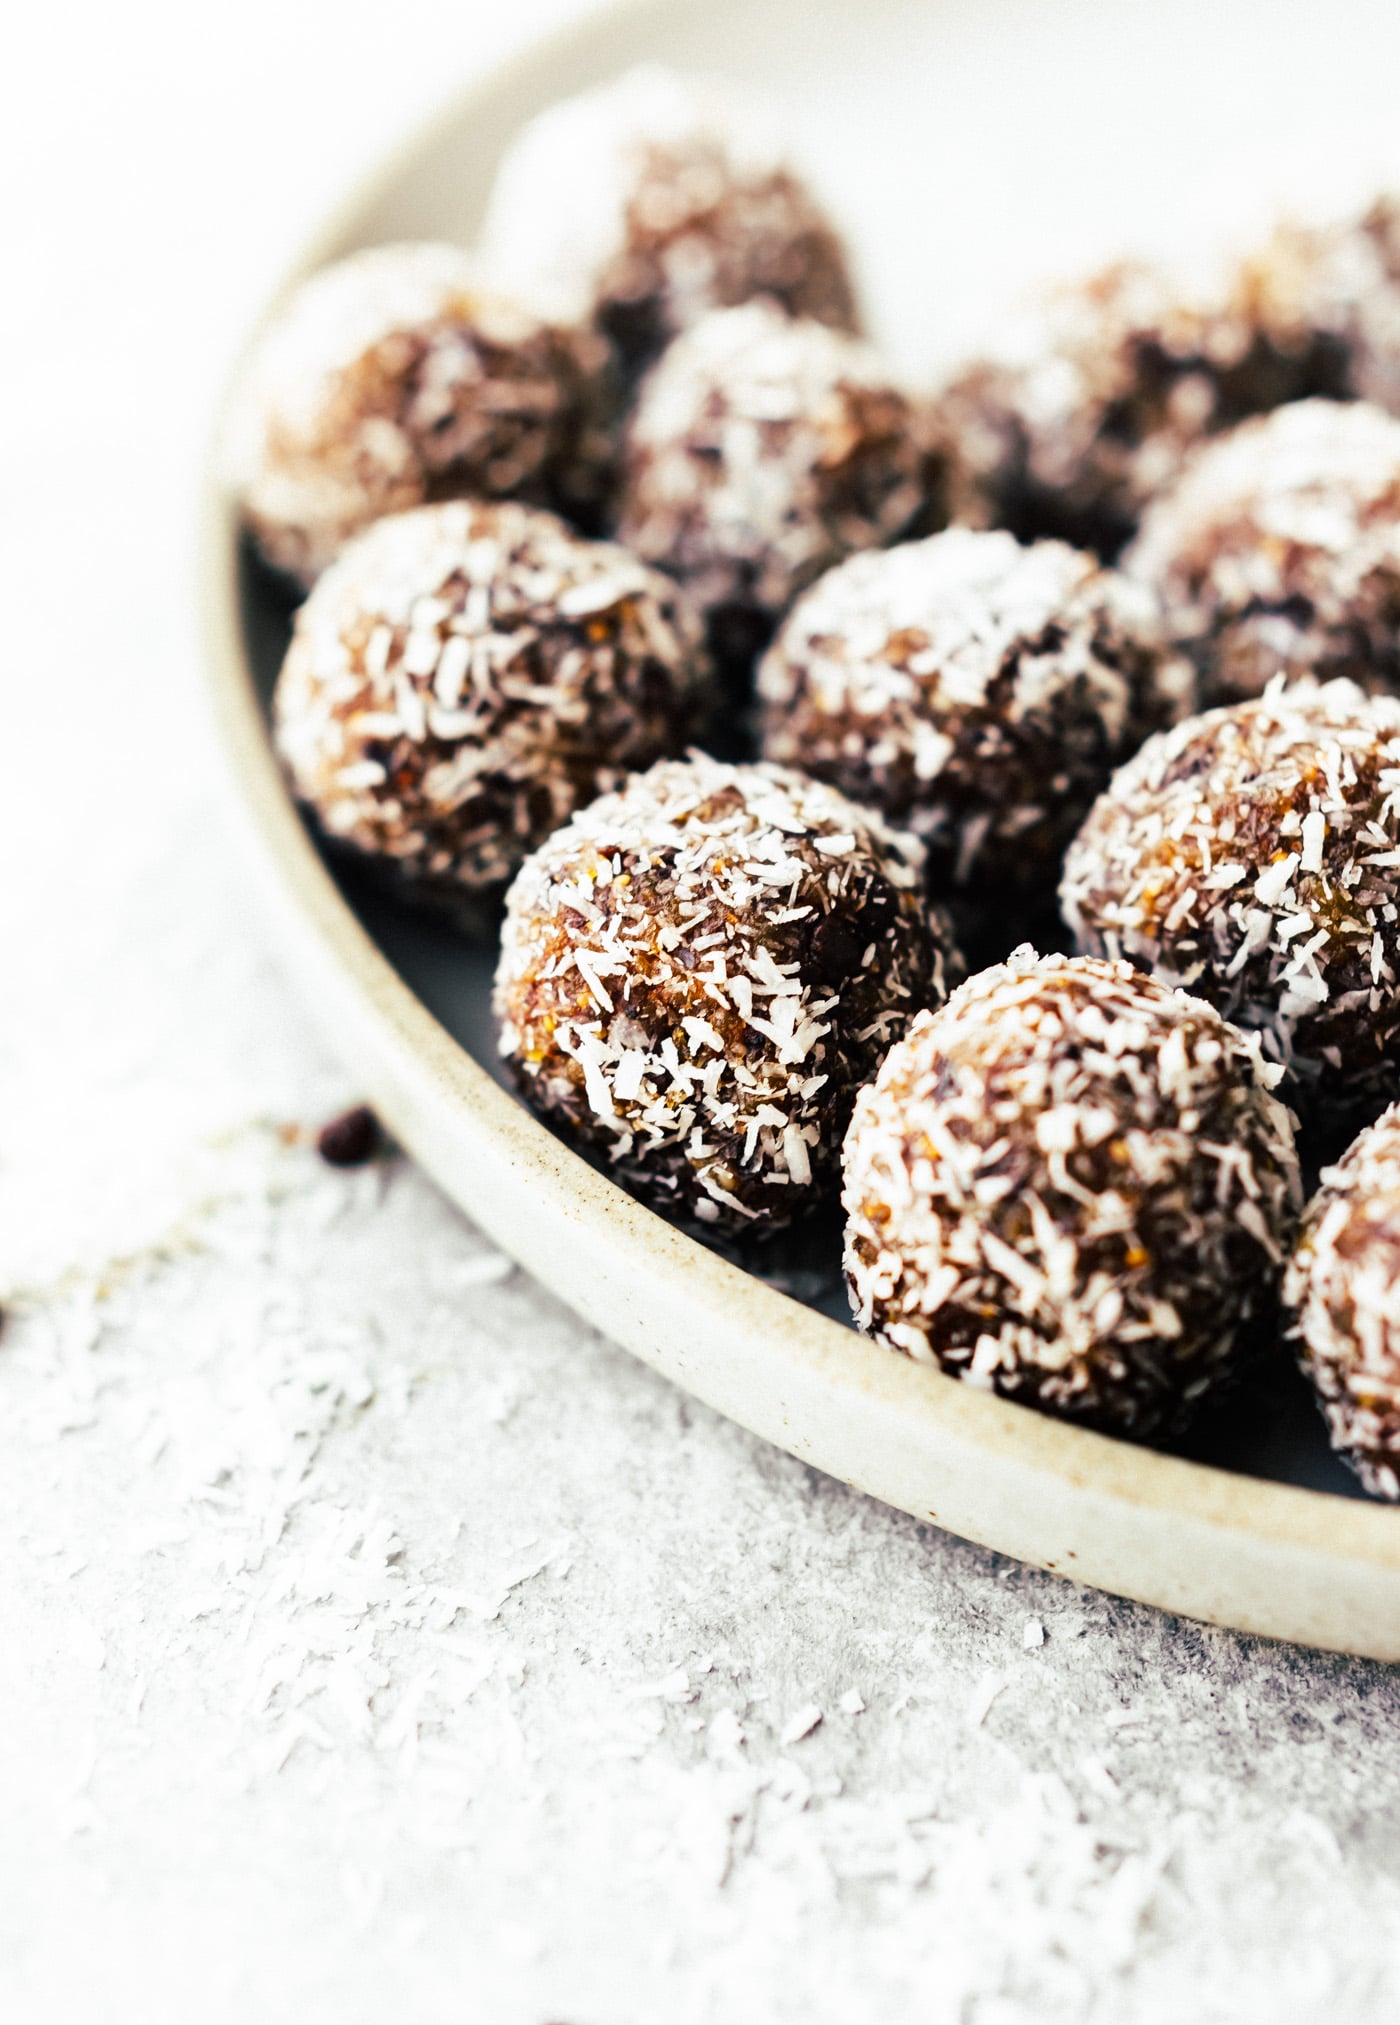 These No Bake Coconut Apricot Fig Bliss Bites are the perfect superfood energy bites! No sugar added, just figs, coconut, apricots, nuts, pure dark chocolate, and a touch of sea salt. A quick wholesome snack to fuel your day!! Paleo, Vegan, and Whole 30 friendly.